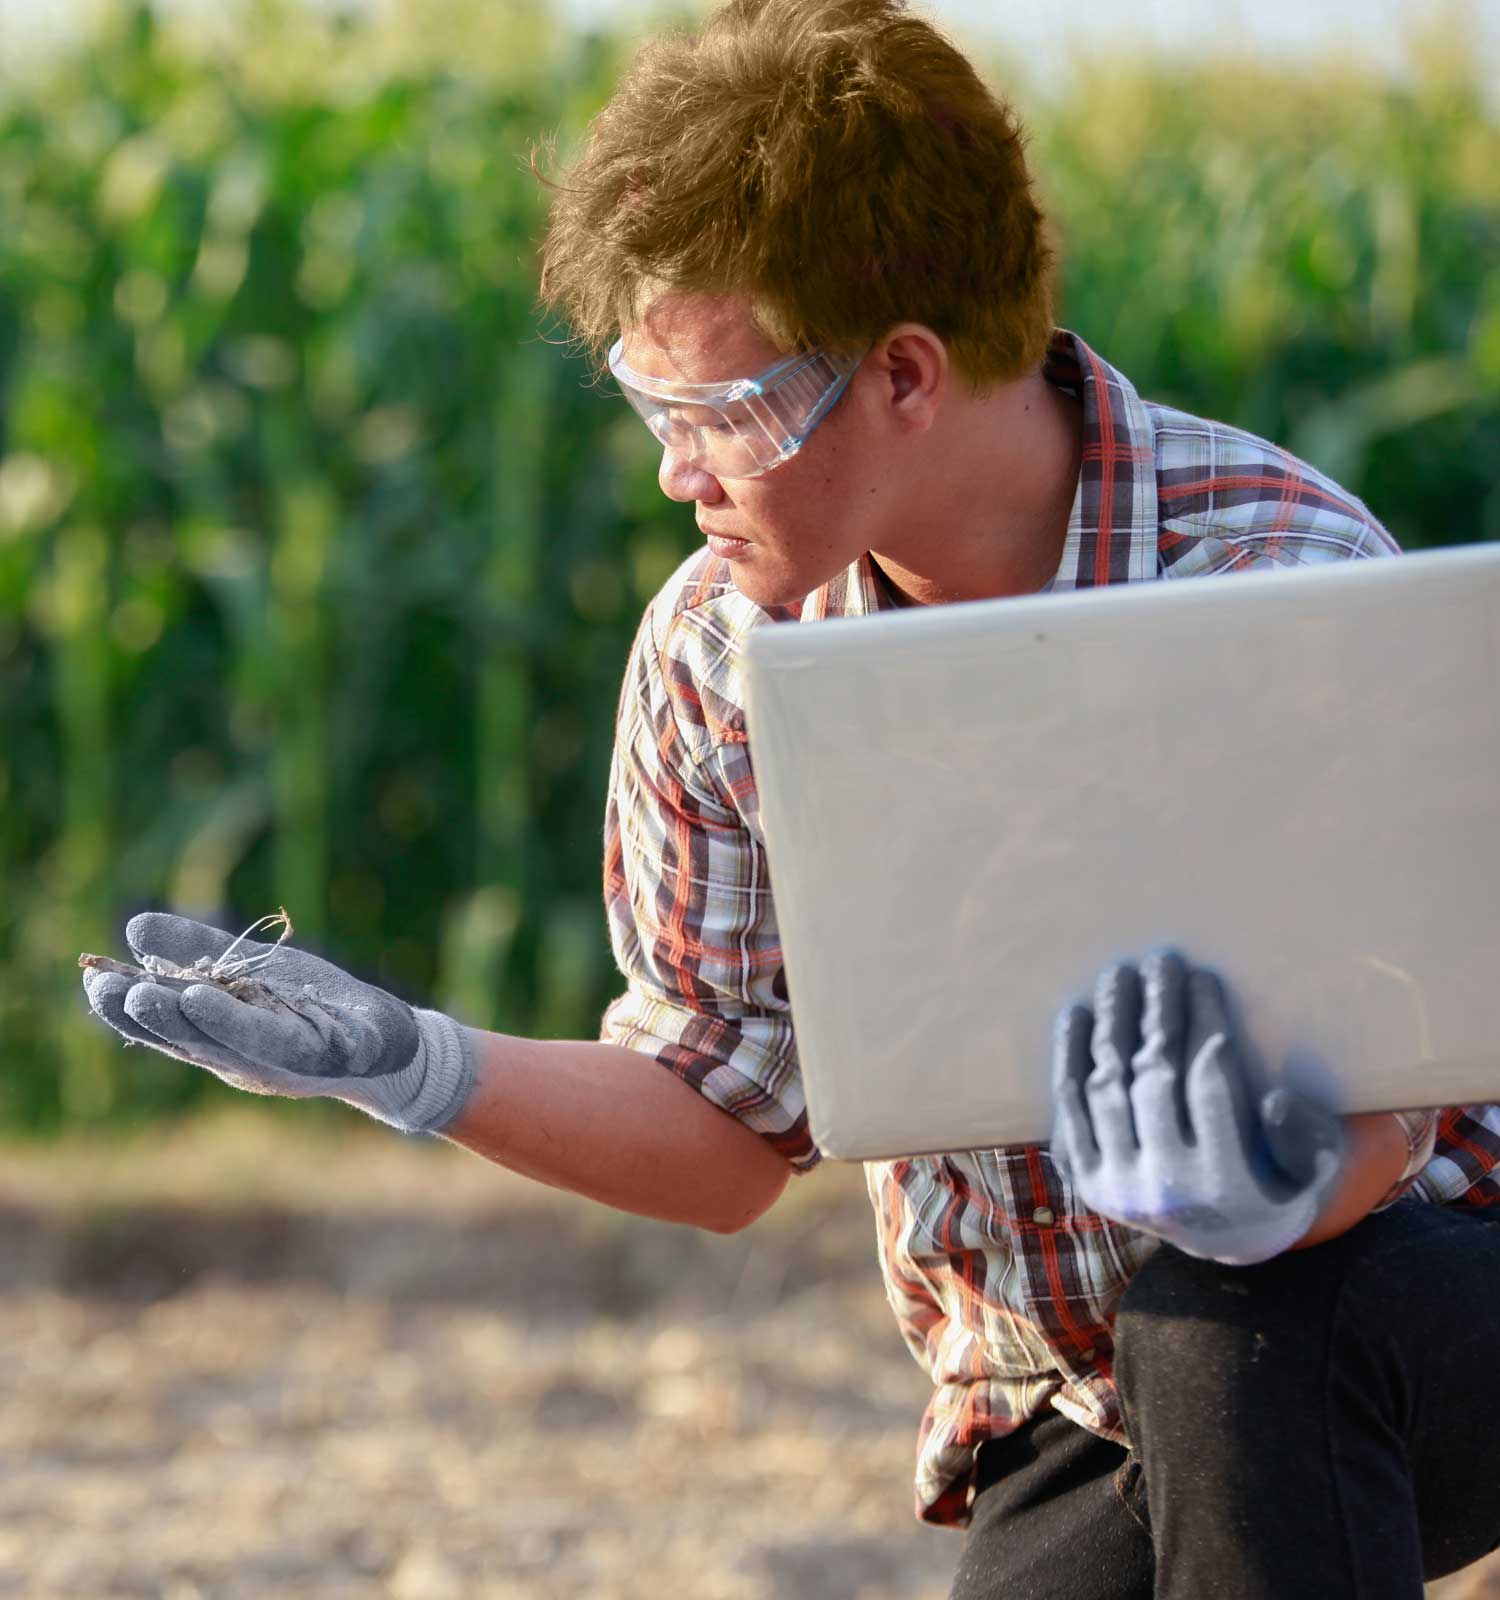 Student outside in work gloves and safety glasses holding a laptop in one hand and examining a plant in the other.